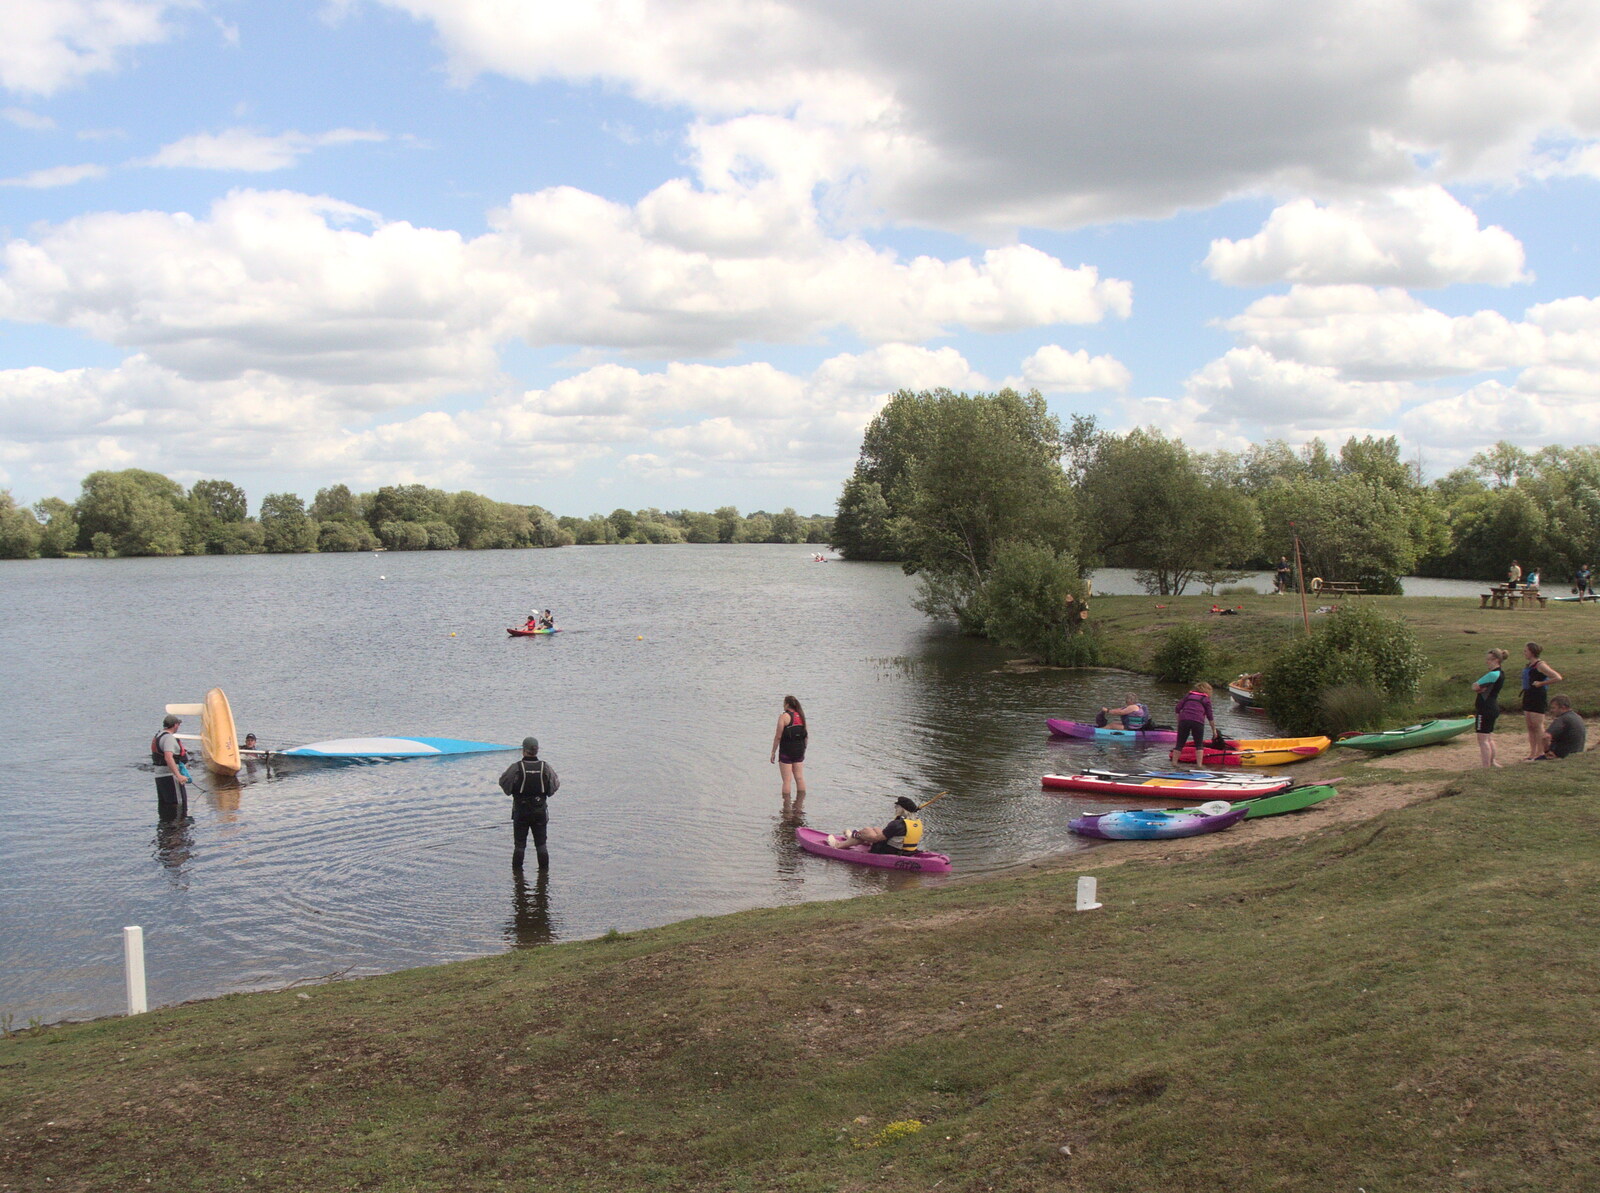 A Day at the Lake, Weybread Pits, Harleston, Norfolk - 11th June 2022: Some capsize-righting lessons occur